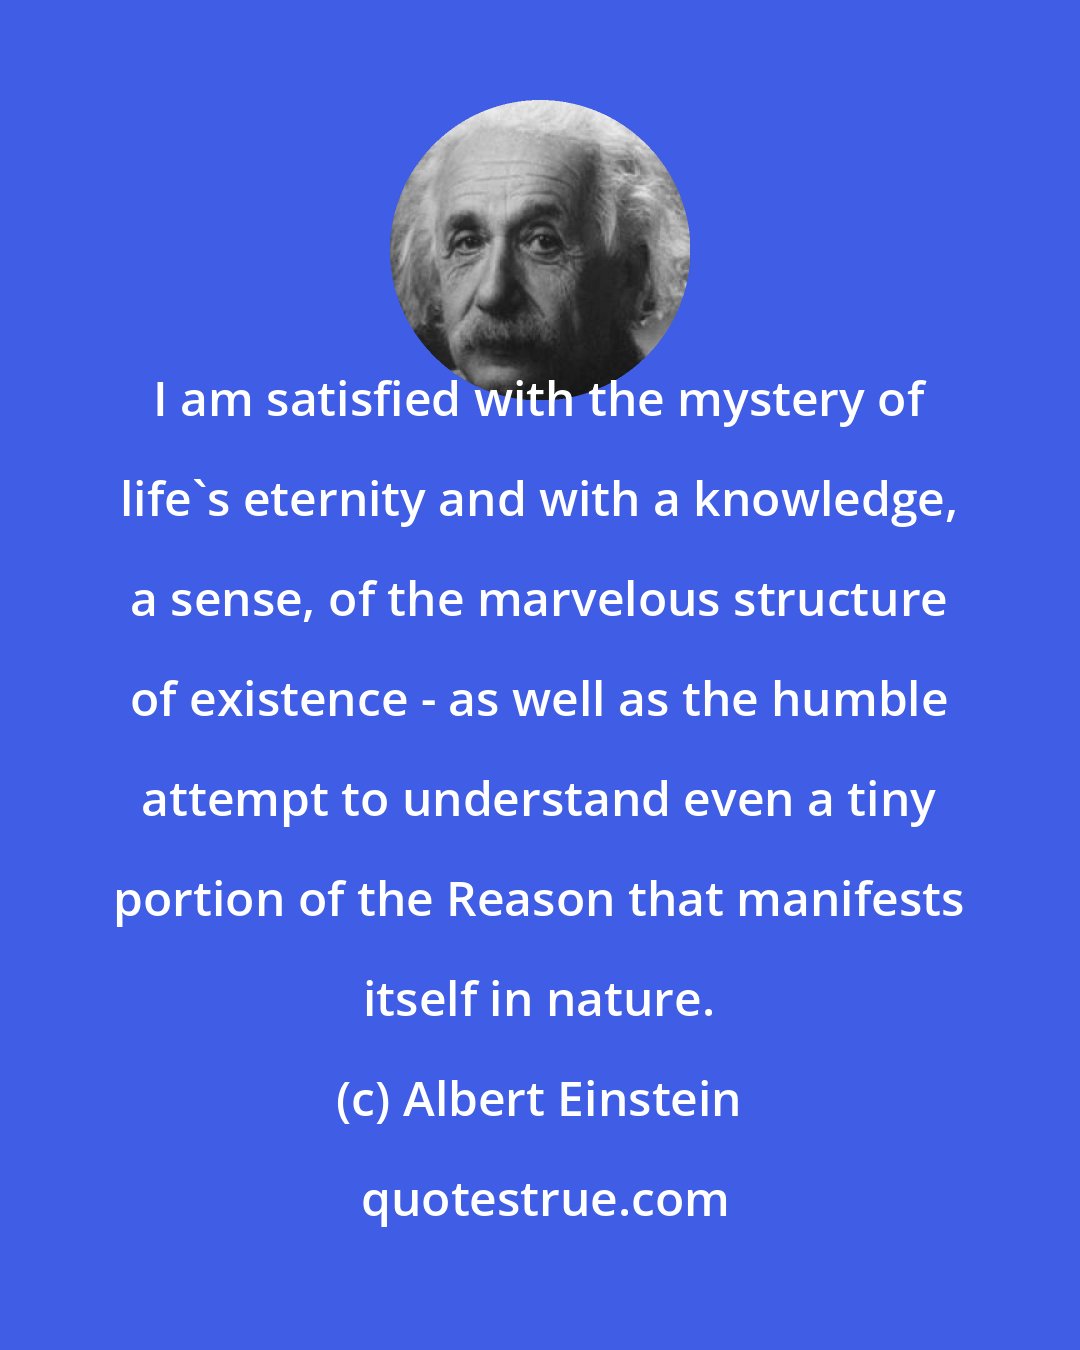 Albert Einstein: I am satisfied with the mystery of life's eternity and with a knowledge, a sense, of the marvelous structure of existence - as well as the humble attempt to understand even a tiny portion of the Reason that manifests itself in nature.